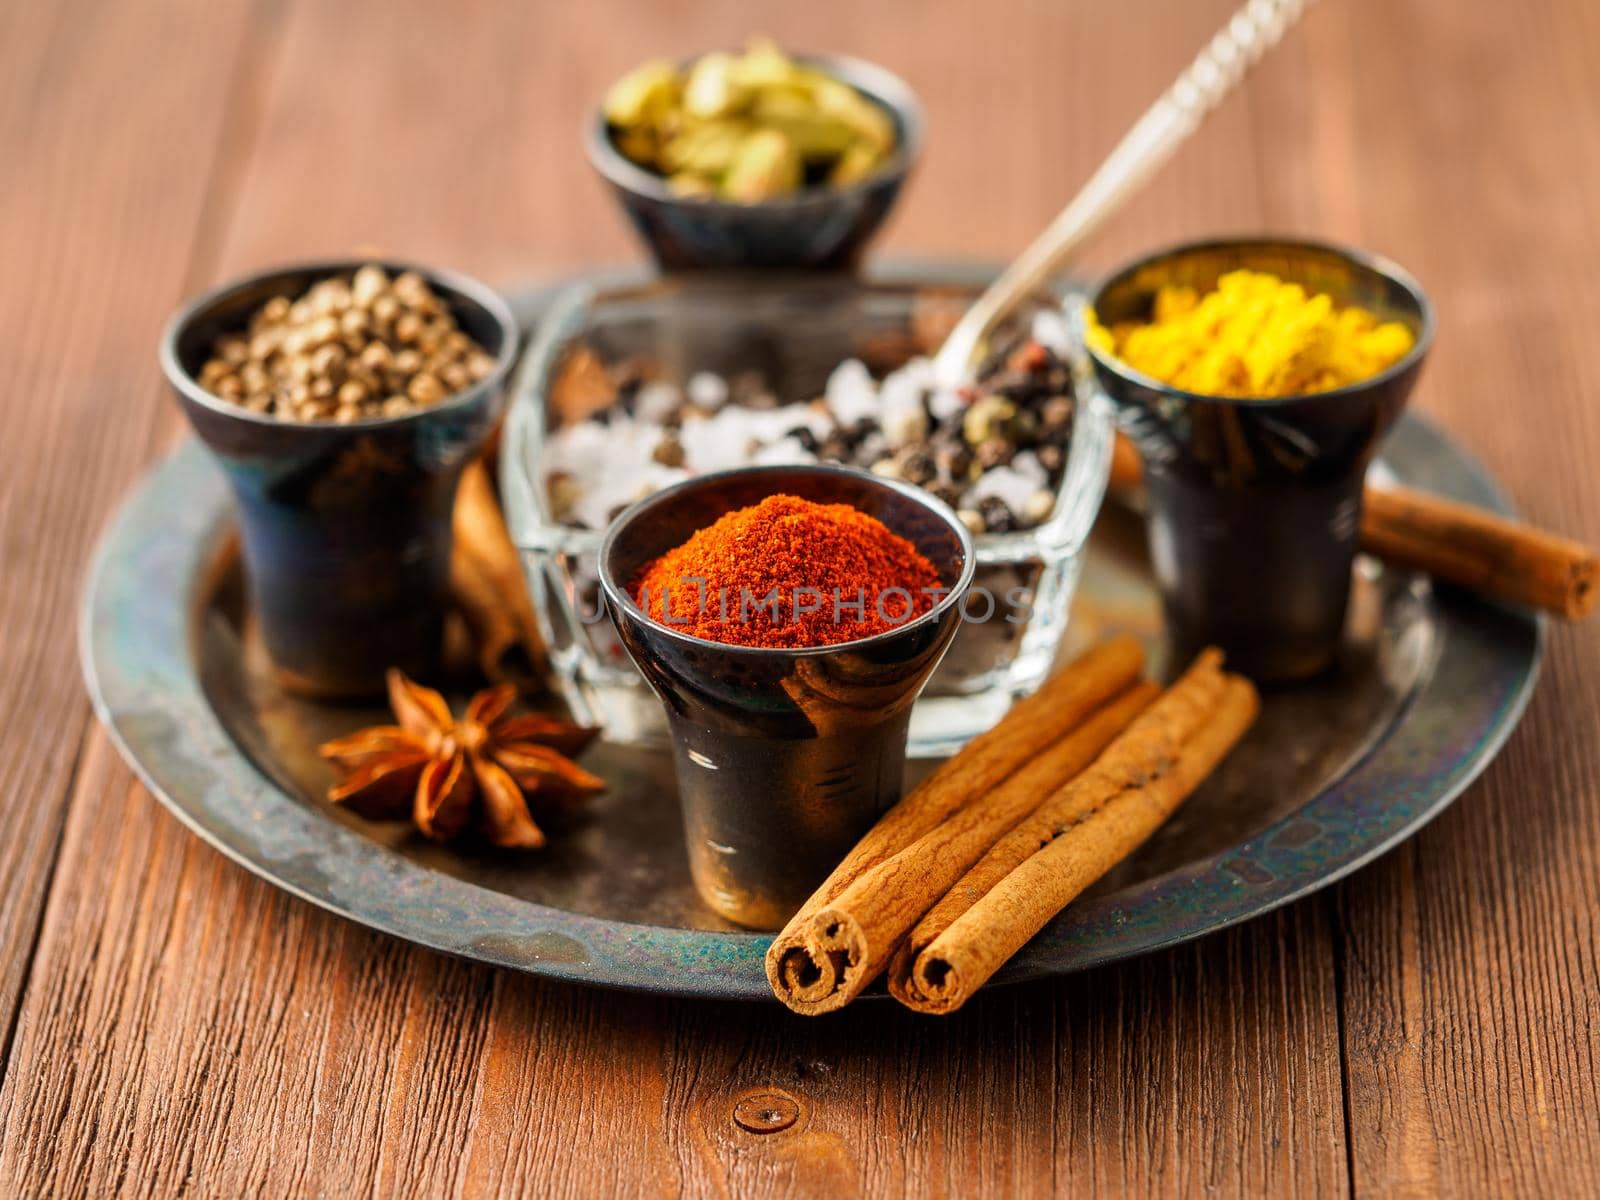 Oriental spice set - coriander, red pepper, turmeric, cinnamon, star anise, rosemary various seasonings in metall cups, on brown wooden table, side view, mcro, selective focus.